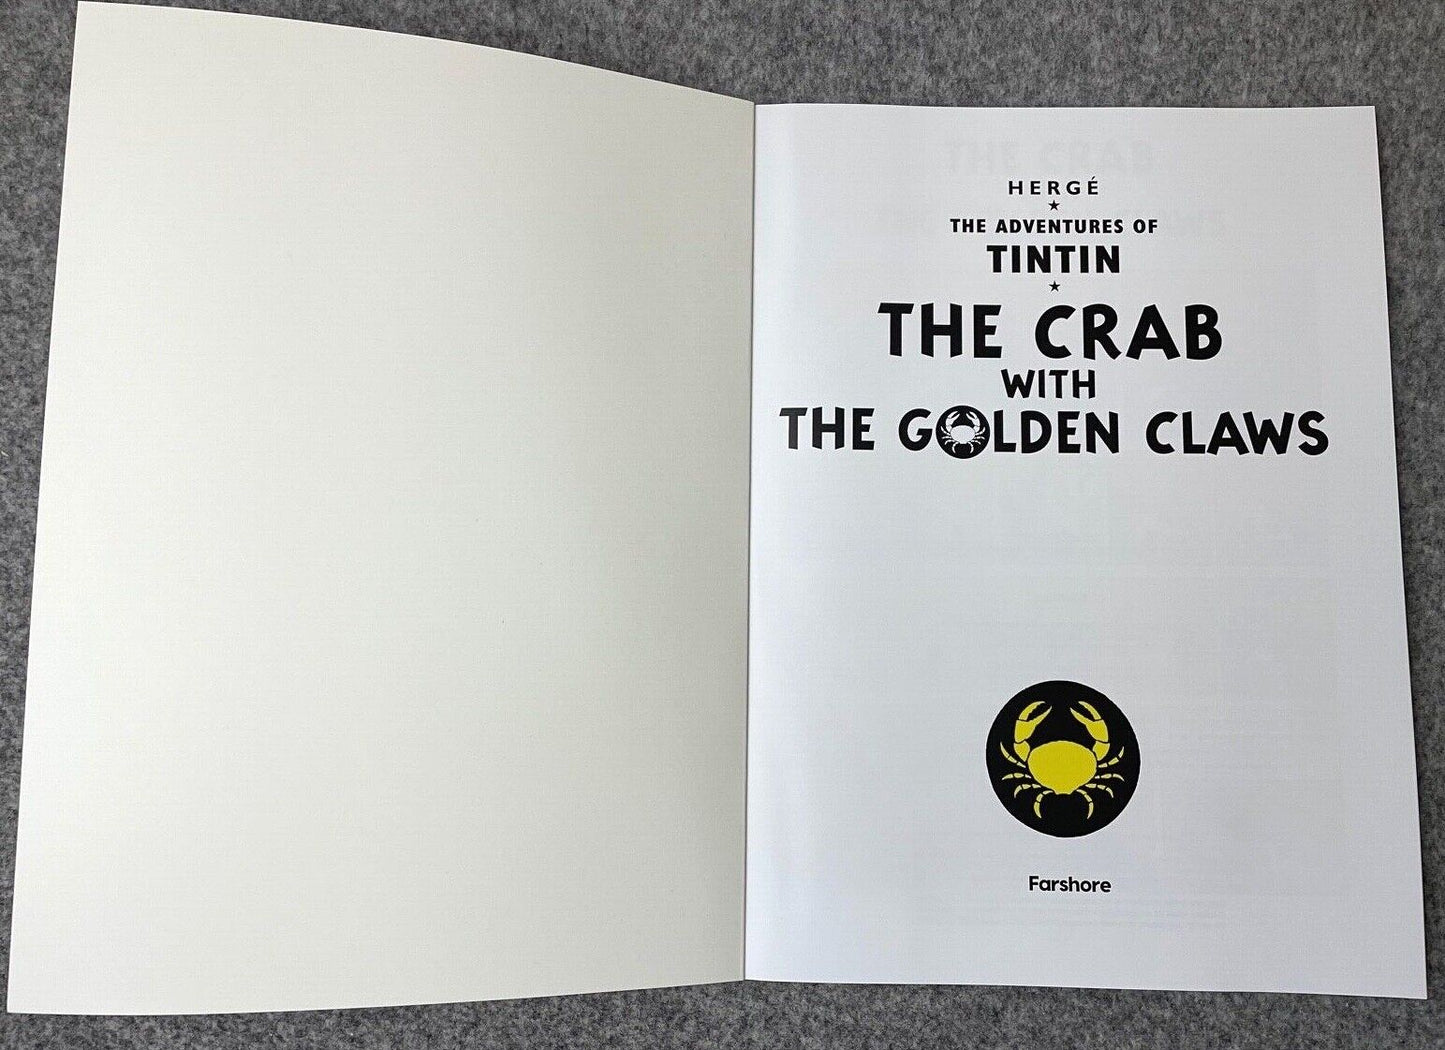 Crab with the Golden Claws - Tintin Farshore 2000s UK Edition Book Paperback Herge